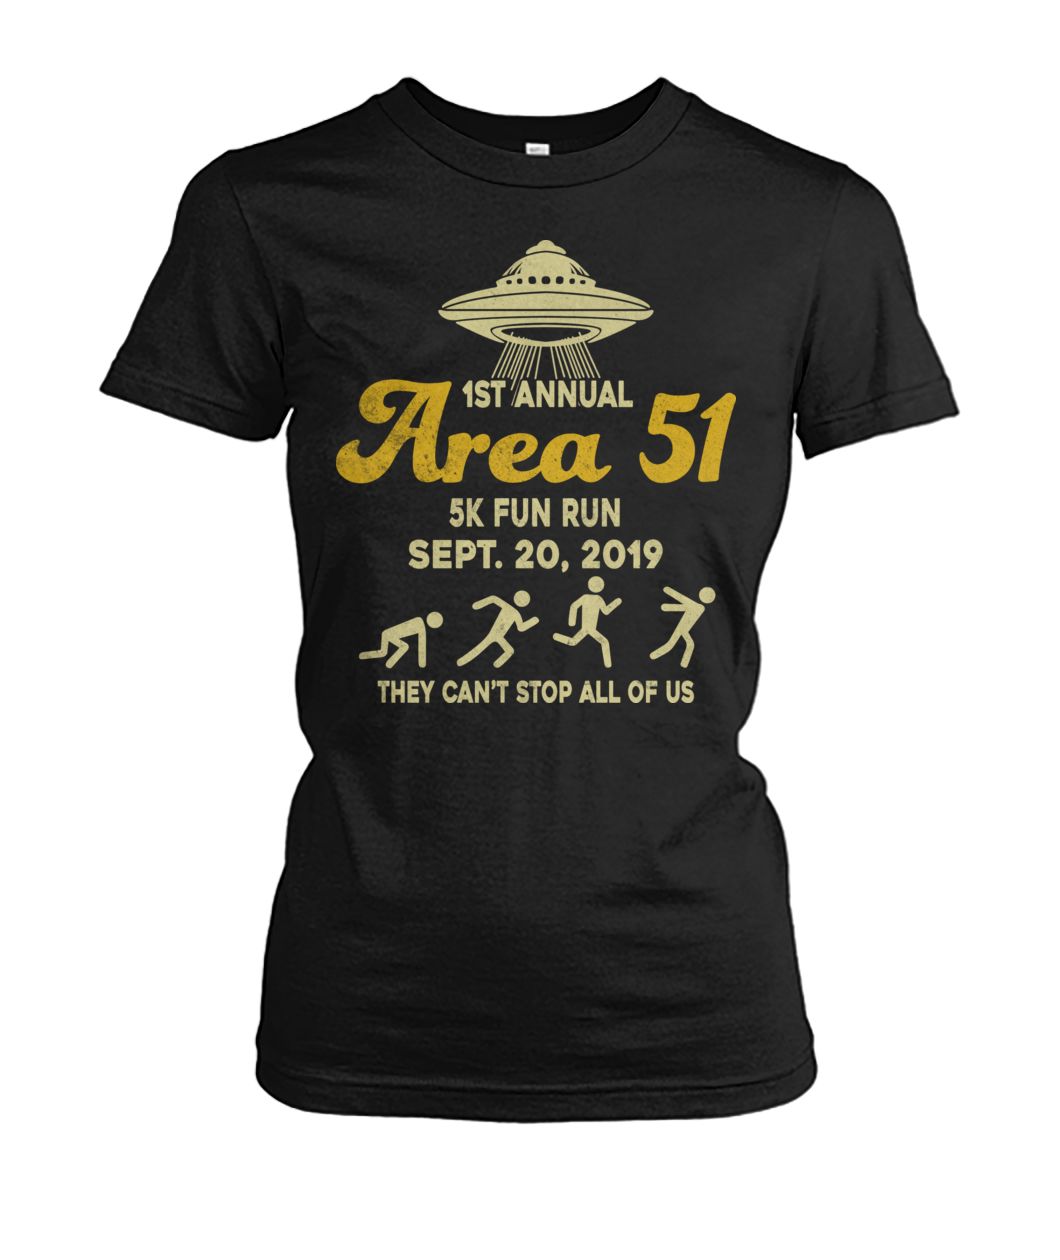 Storm area 51 5k fun run september 20 2019 they can't stop all of us women's crew tee